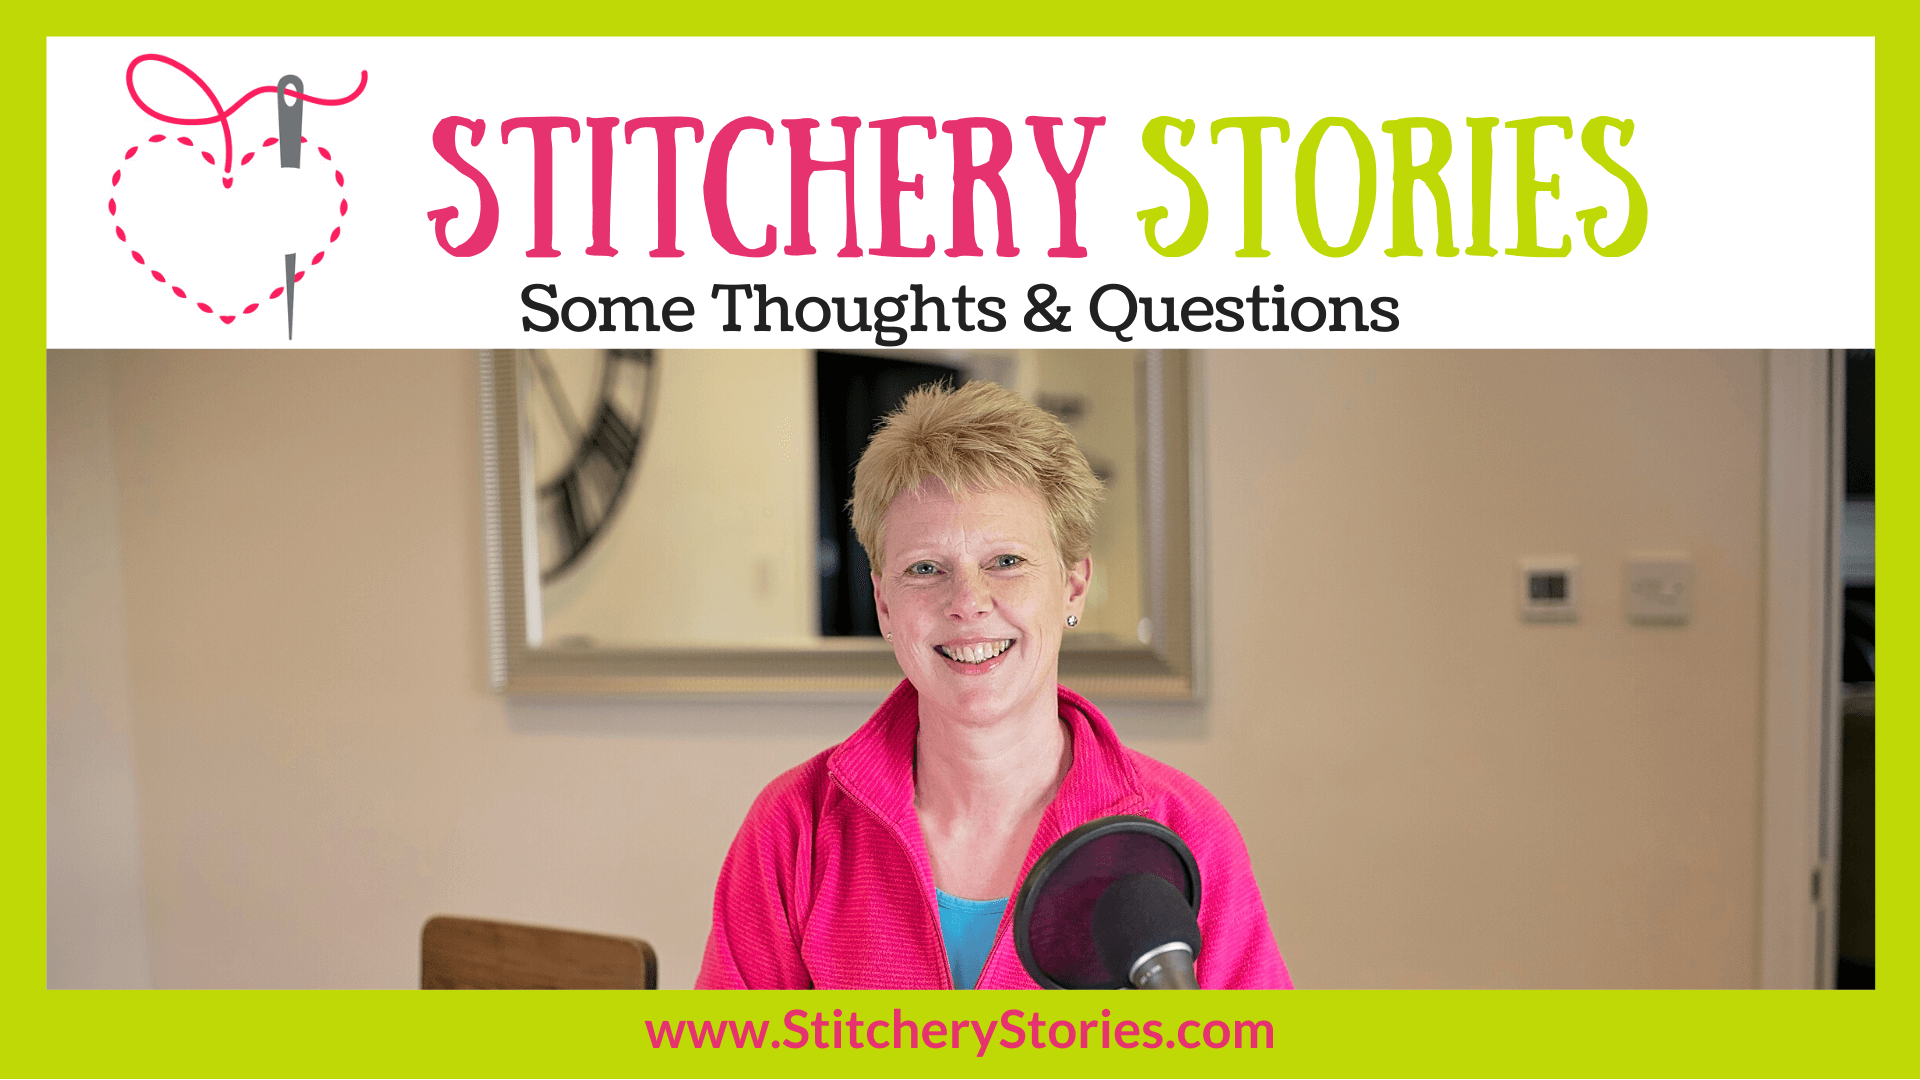 May 2020 update Susan Weeks host Stitchery Stories embroidery podcast Wide Art